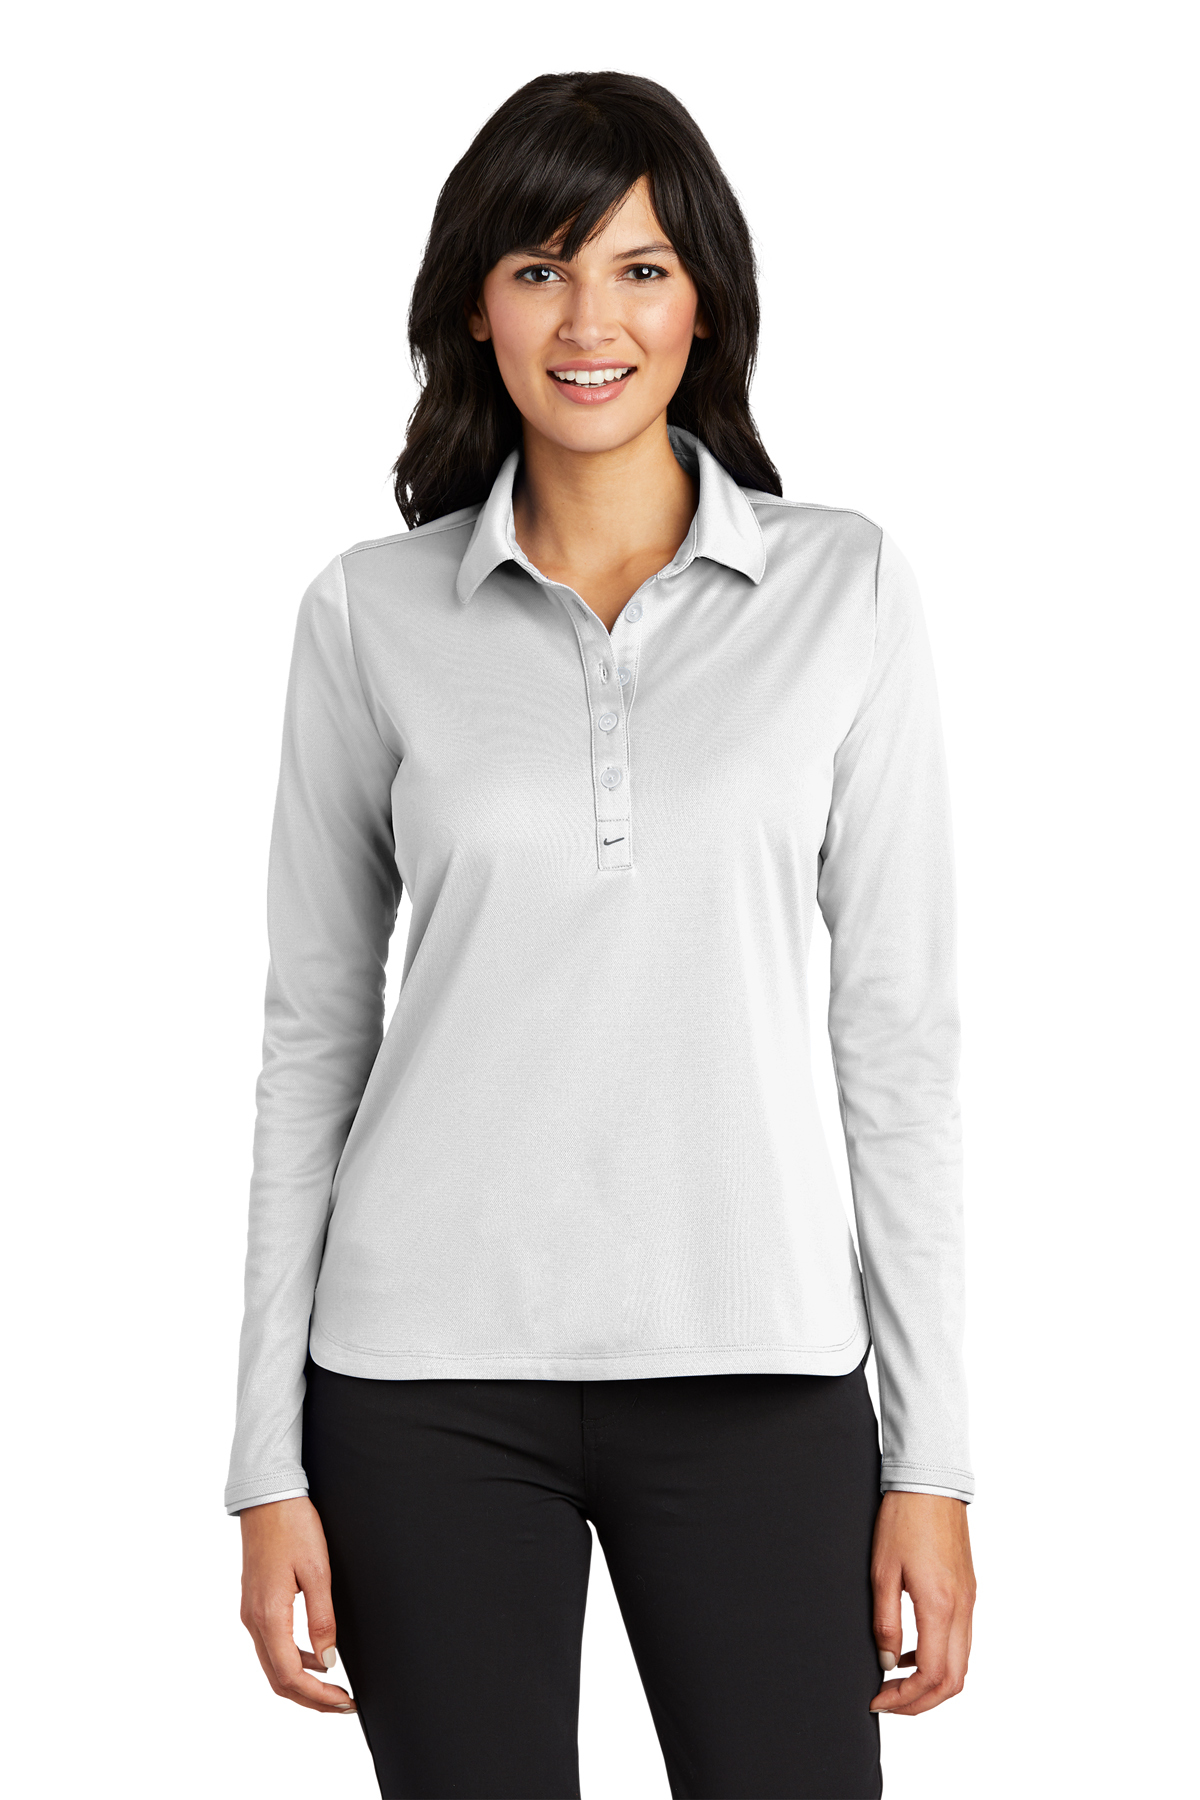 Nike Ladies Long Sleeve Dri-FIT Stretch Tech Polo, Product